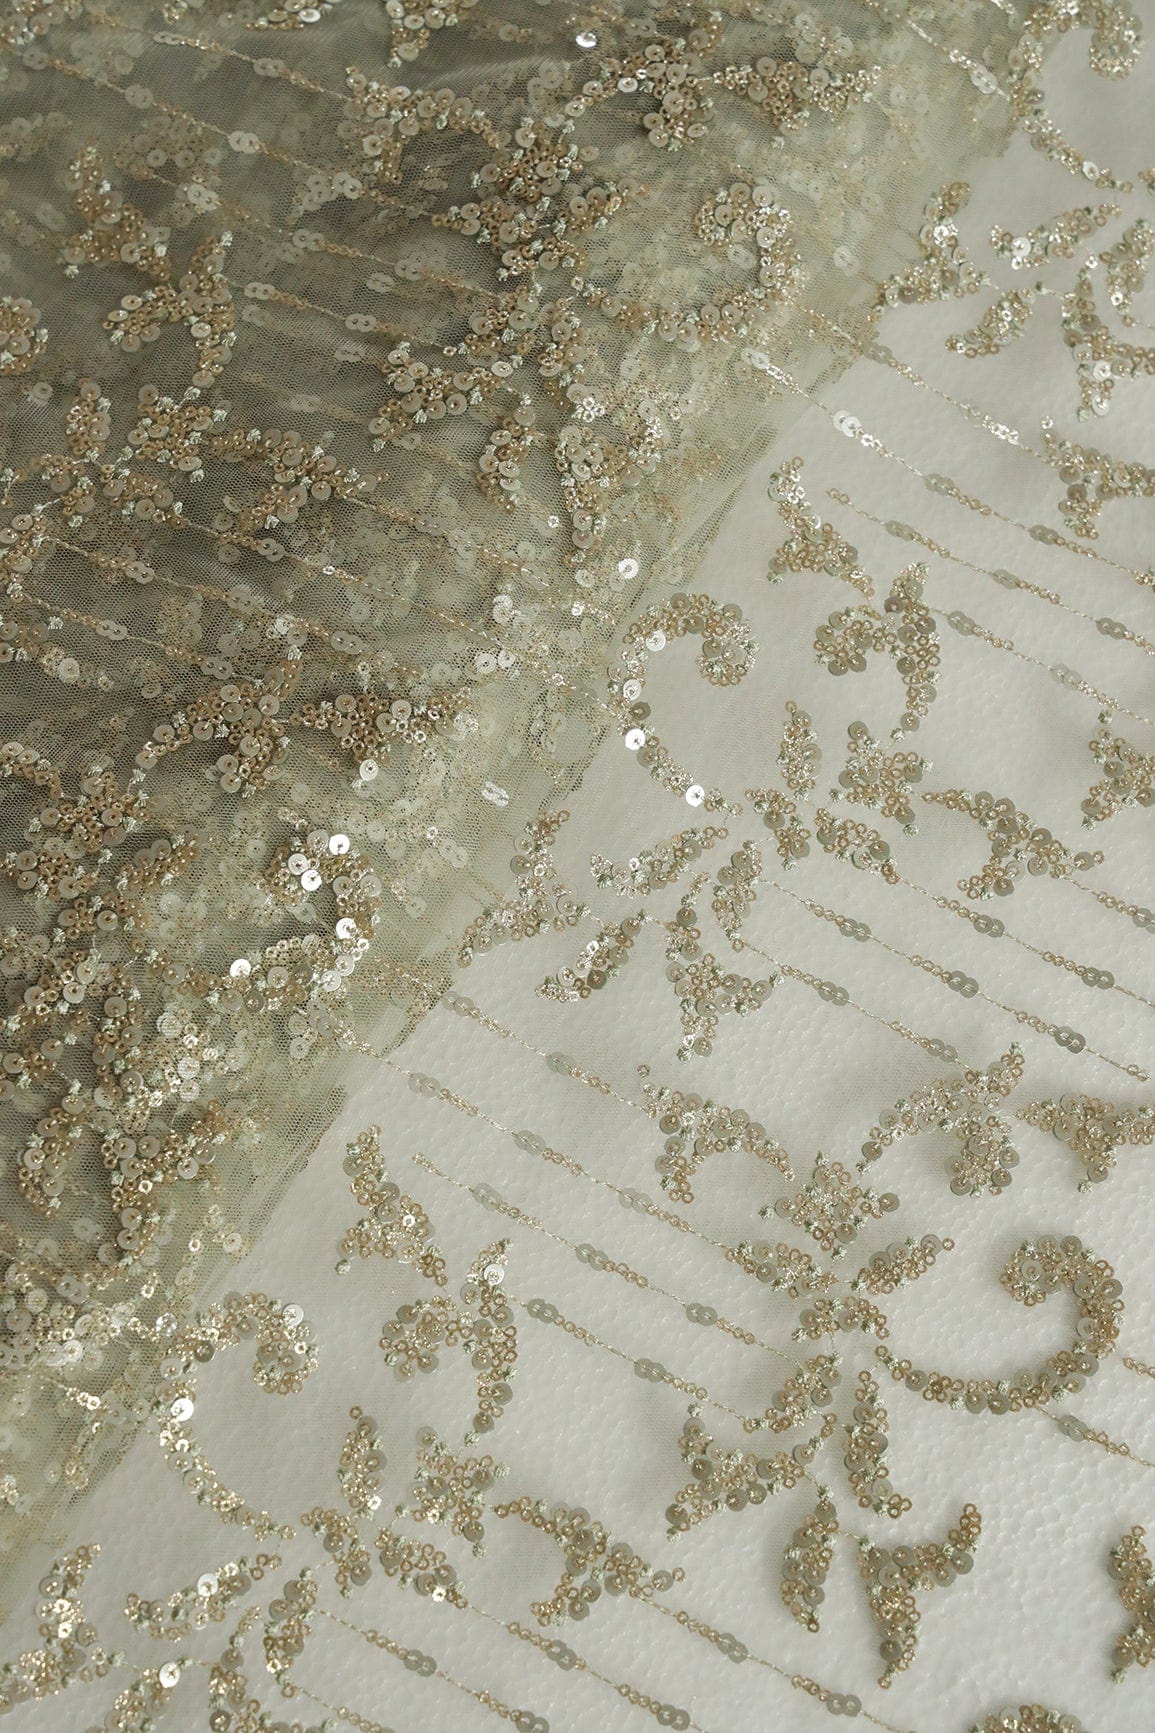 doeraa Embroidery Fabrics Gold And Silver Sequins With Olive Thread Abstract Embroidery Work On Olive Soft Net Fabric